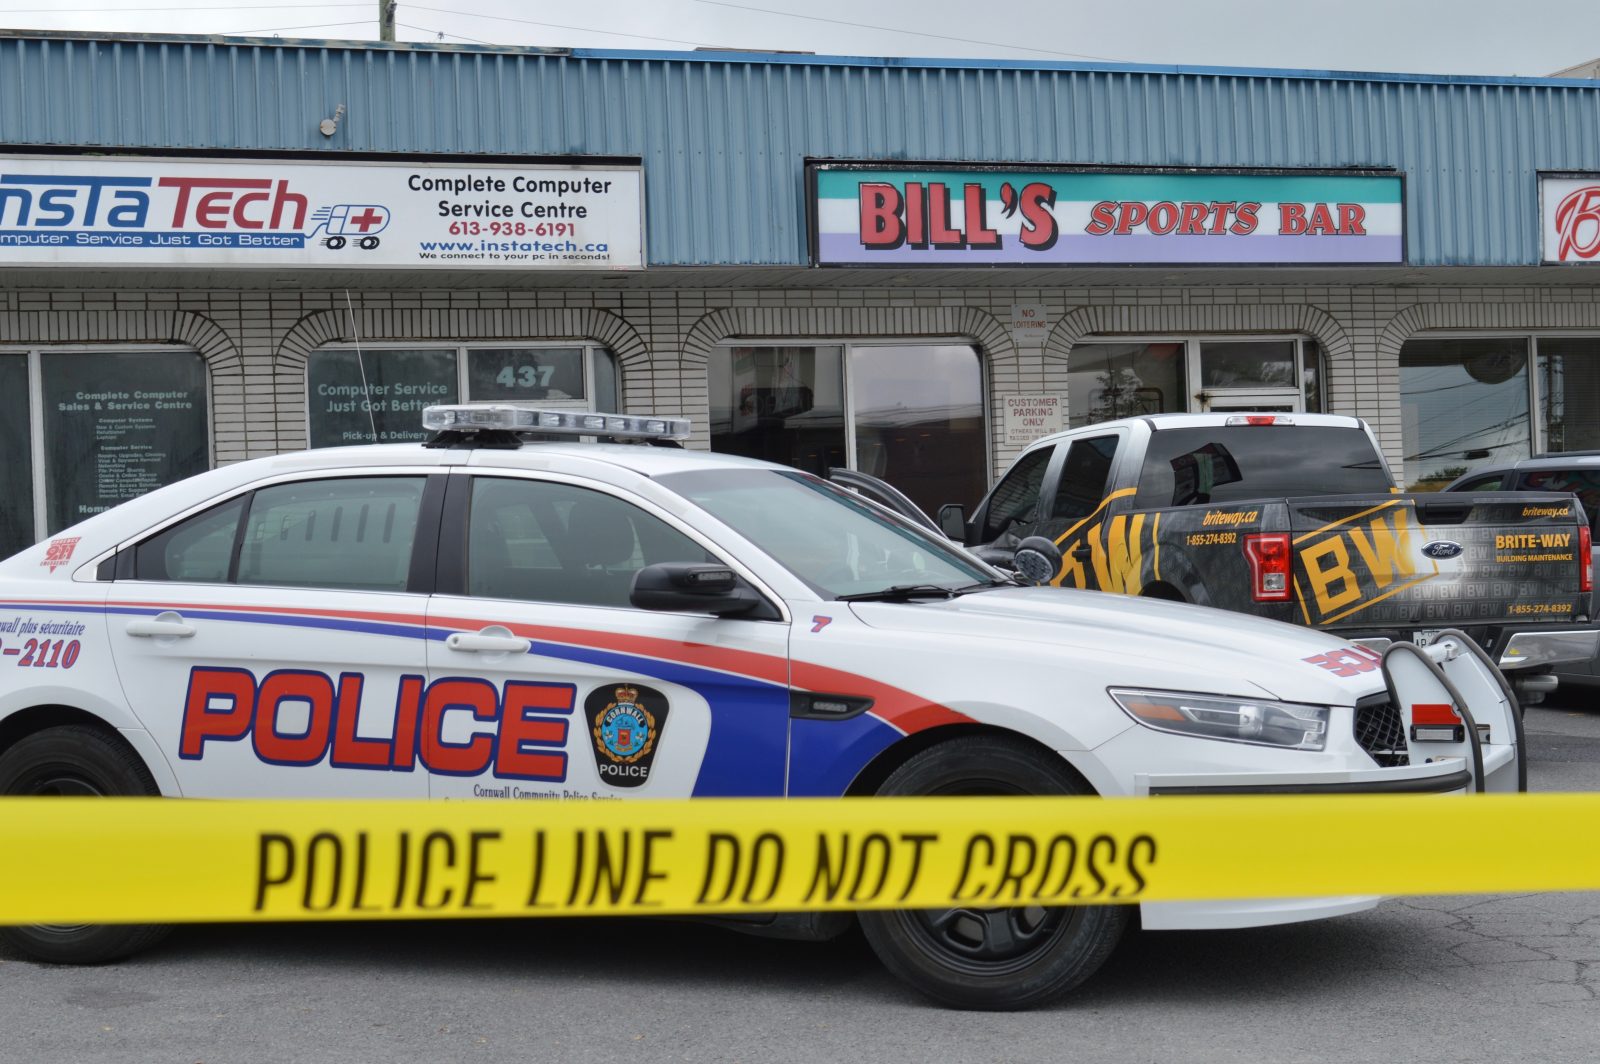 Police lay attempted murder charge in Bill’s Sports Bar stabbing